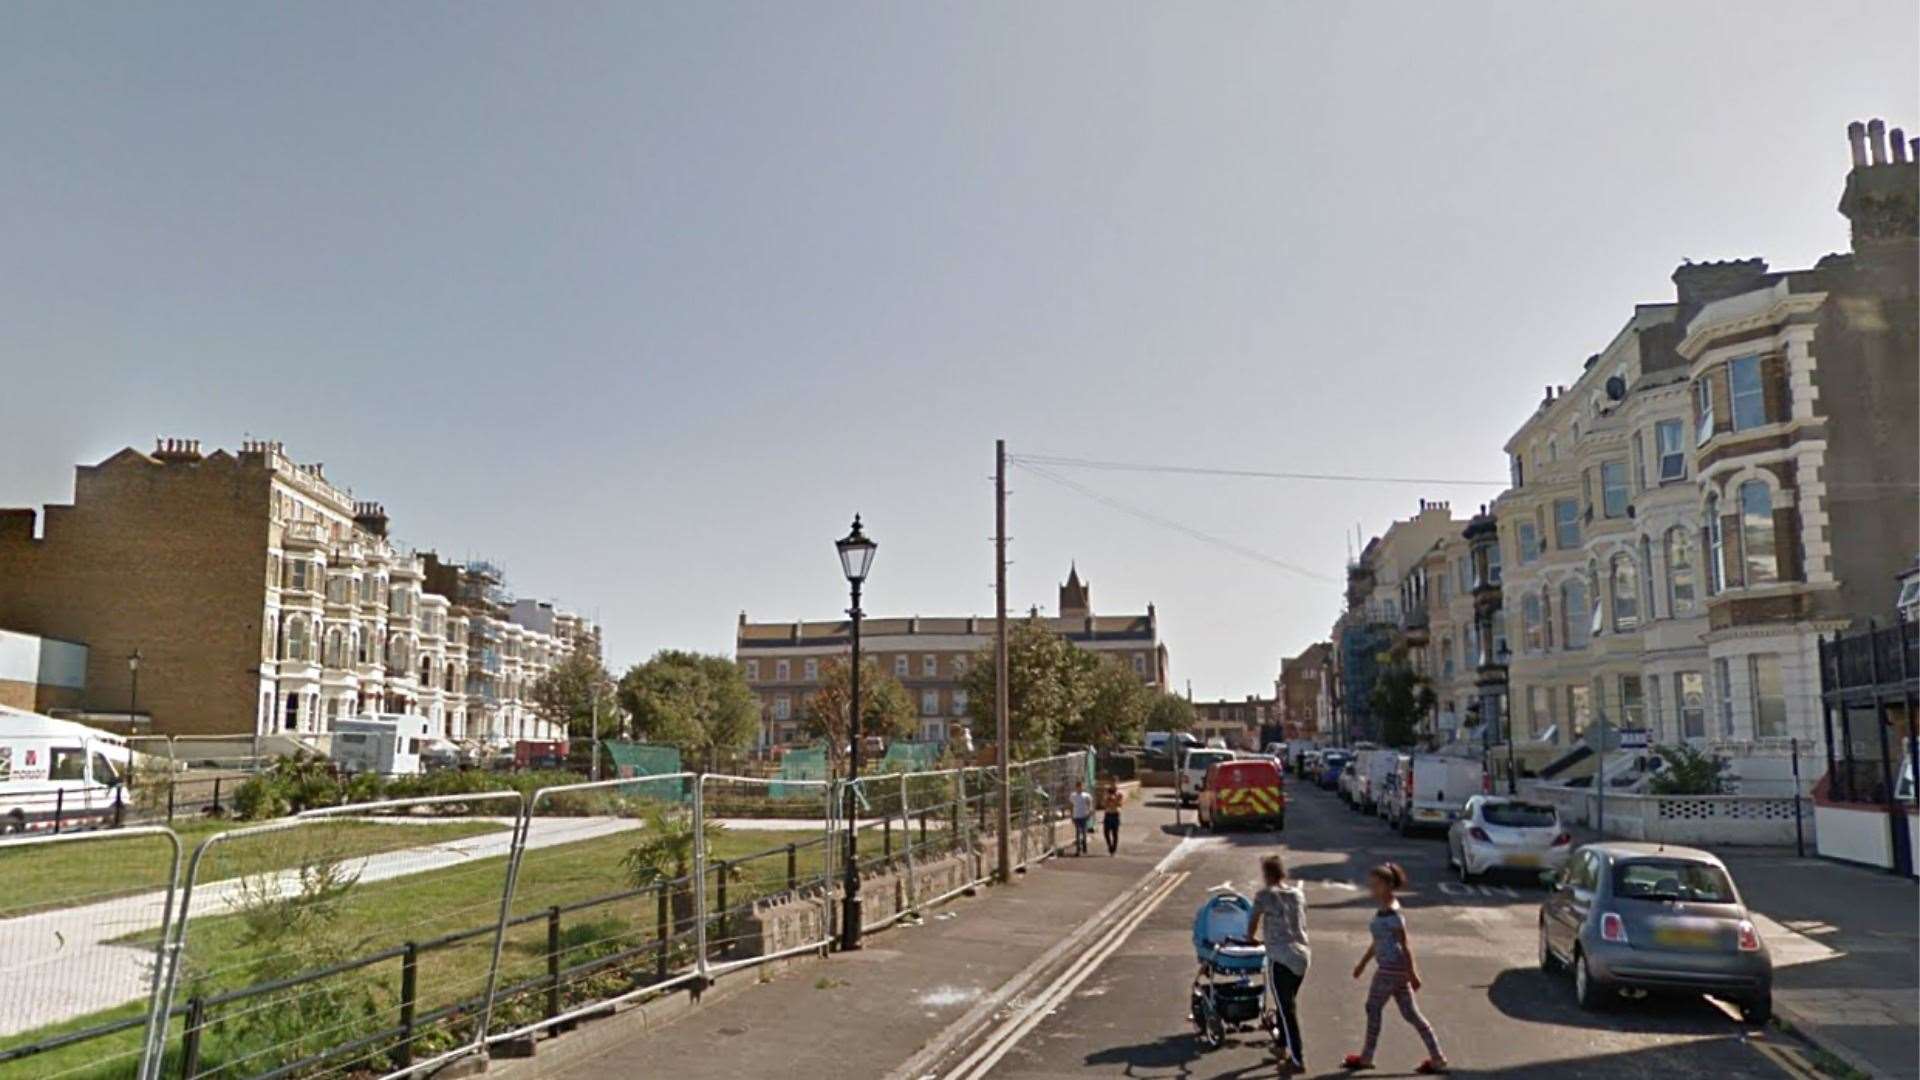 Dalby Square looks a little different now. Picture: Google Maps